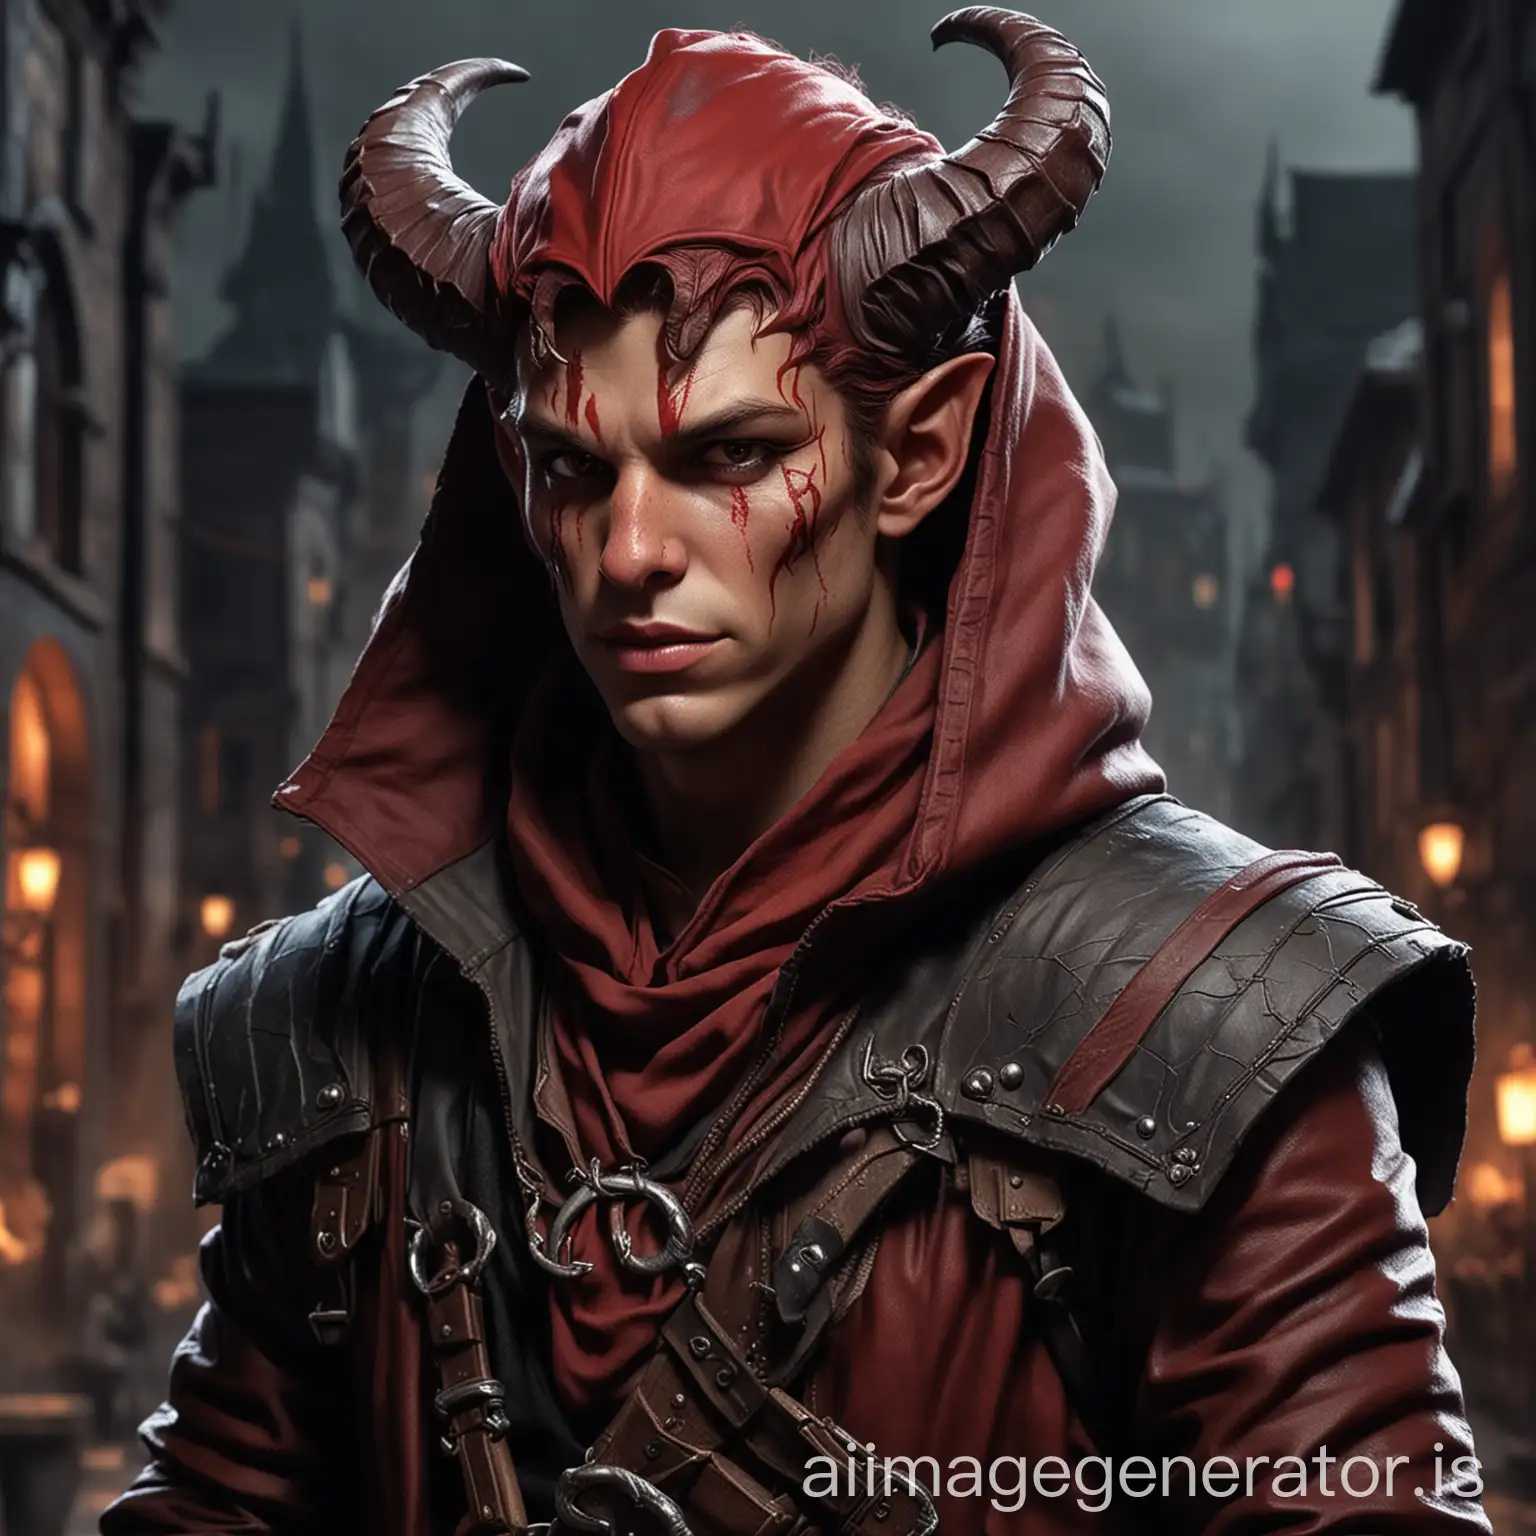 Short Young Male Tiefling Rogue for DND with red skin and dark city background
wearing a hood 
make him less threating
